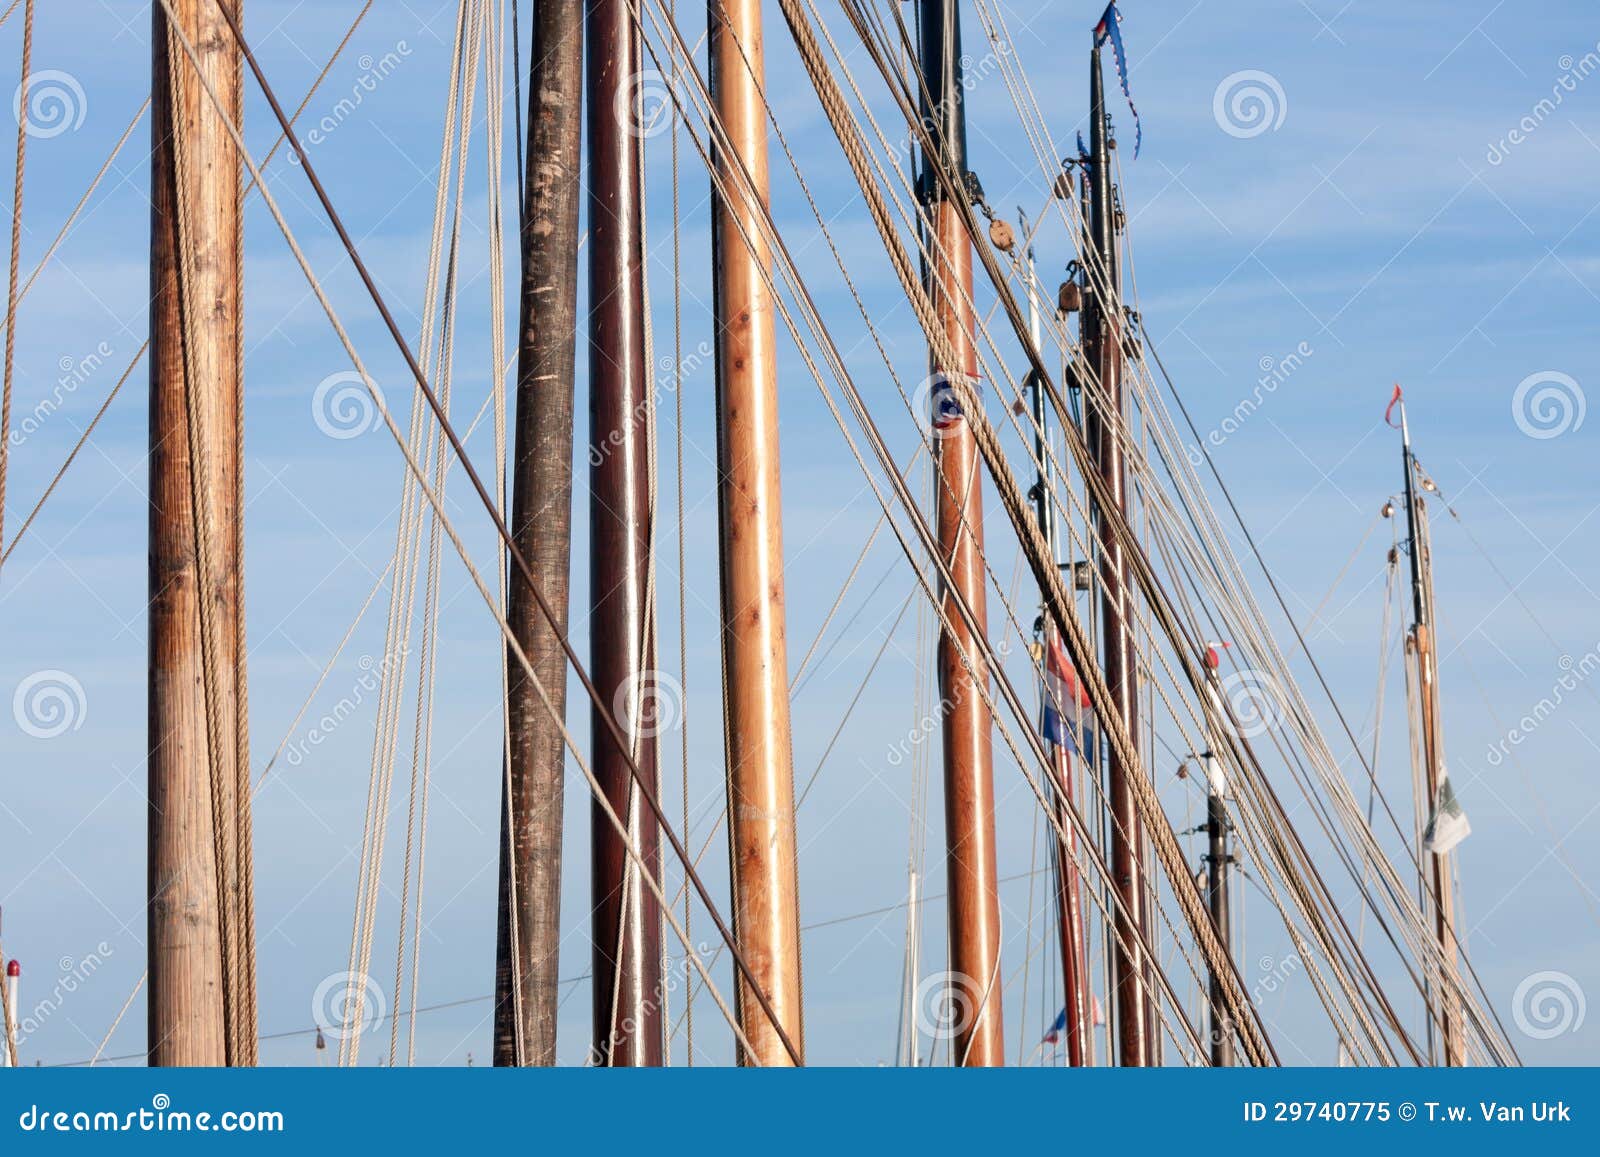 Masts And Rigging From Old Wooden Sailing Ships Royalty Free Stock 